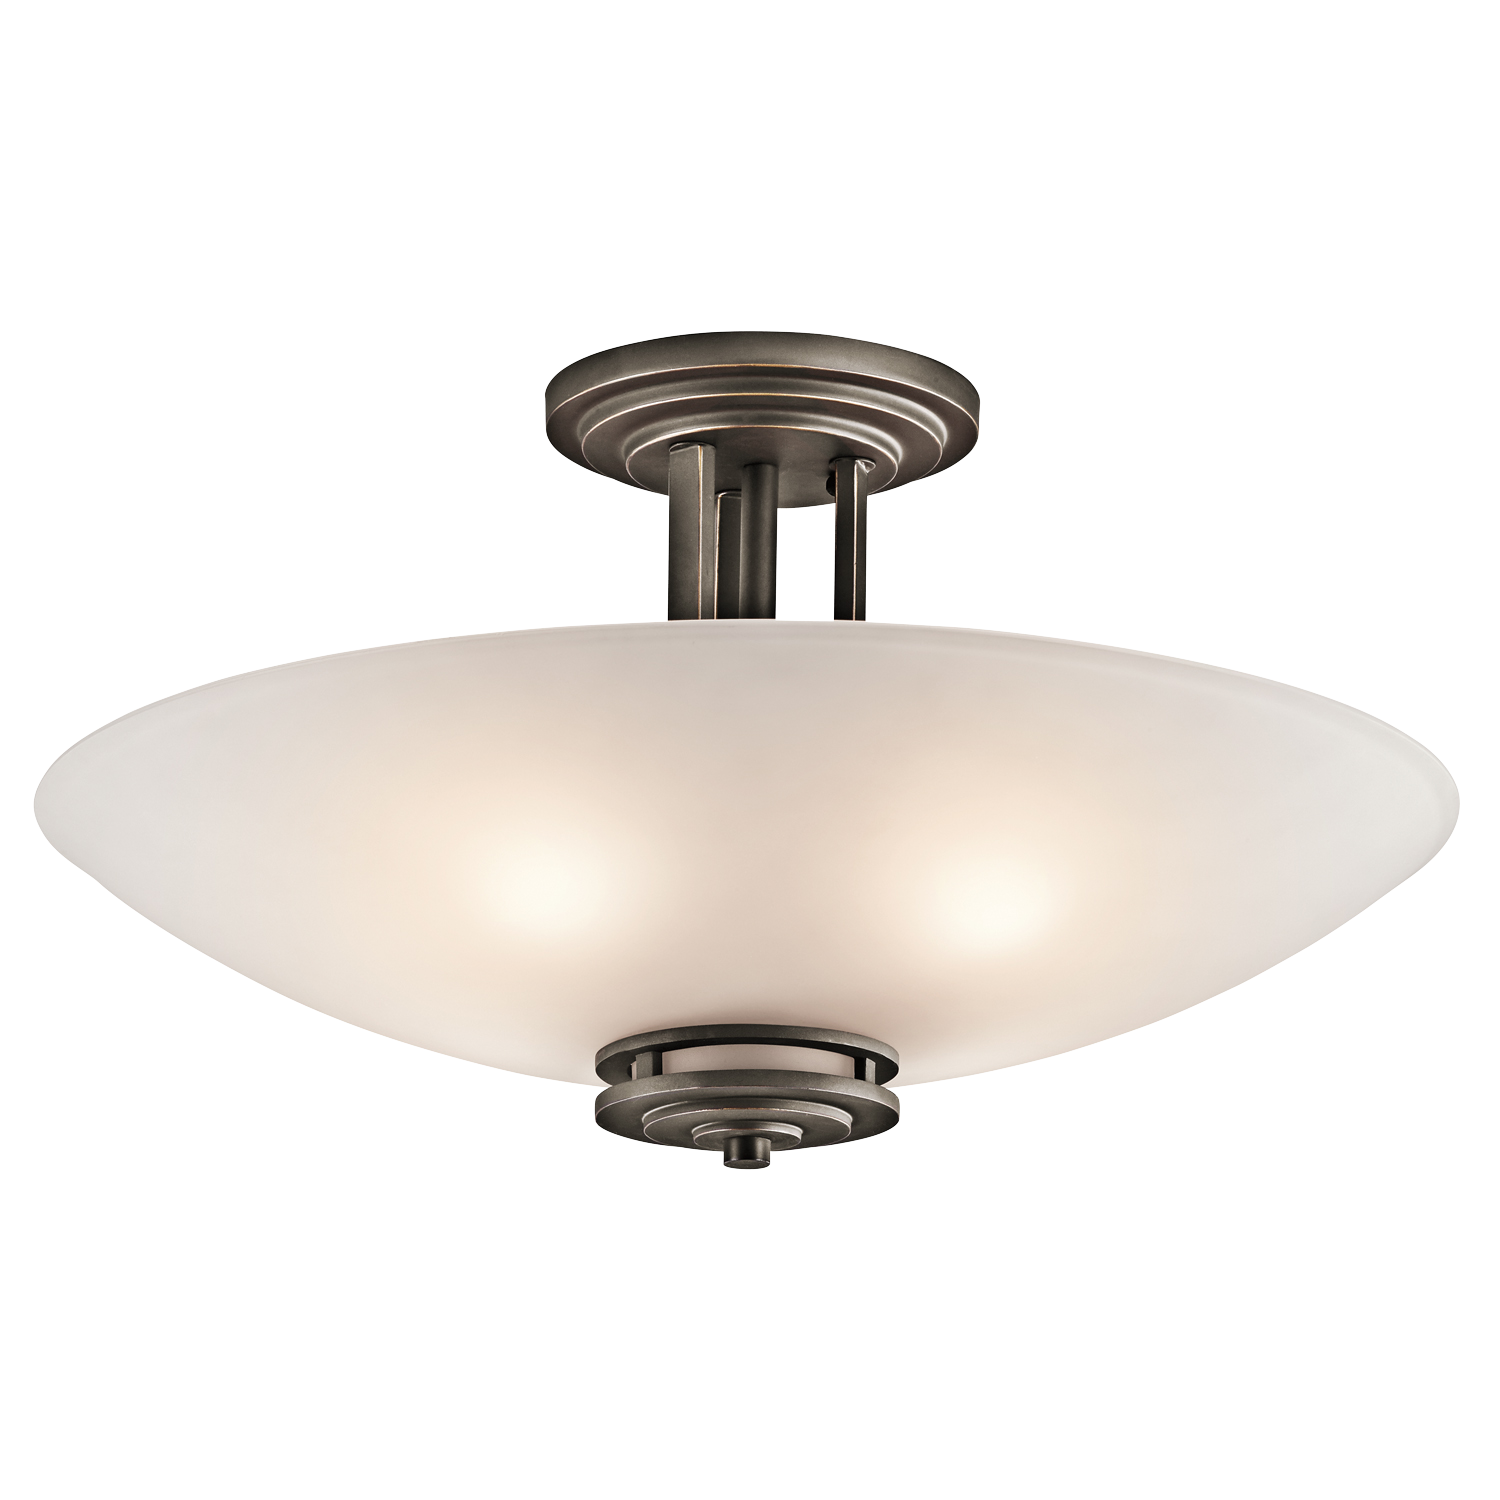 White Ceiling Lamp PNG Transparent Image